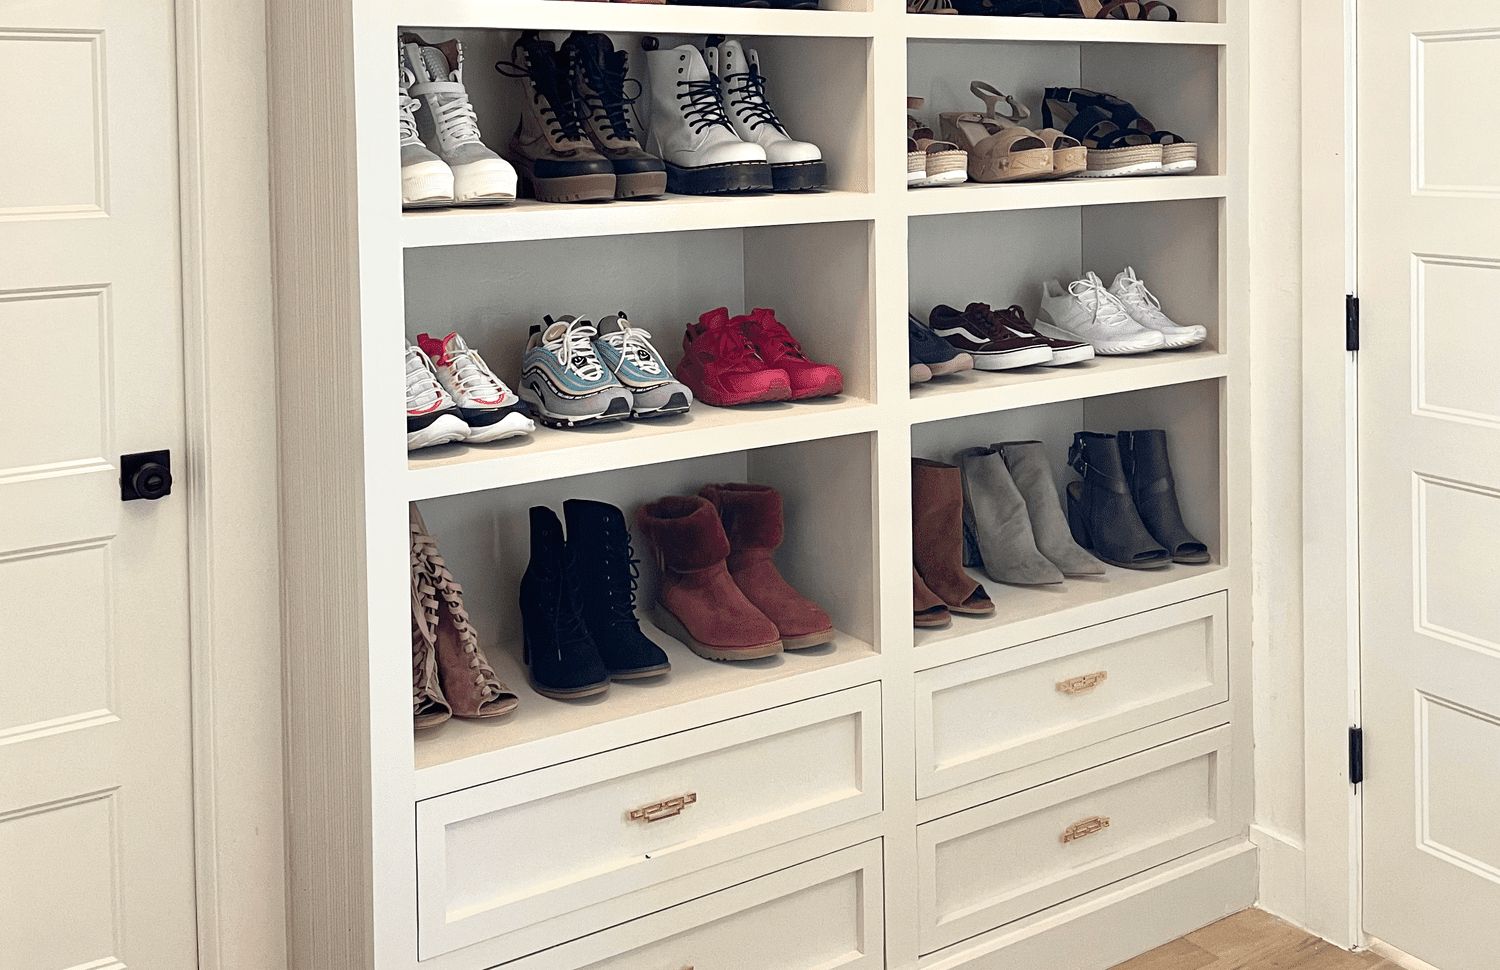 Space Of The Week: Diy Floor To Ceiling Shoe Storage Wall With Wardrobe Shoe Storages (View 3 of 15)